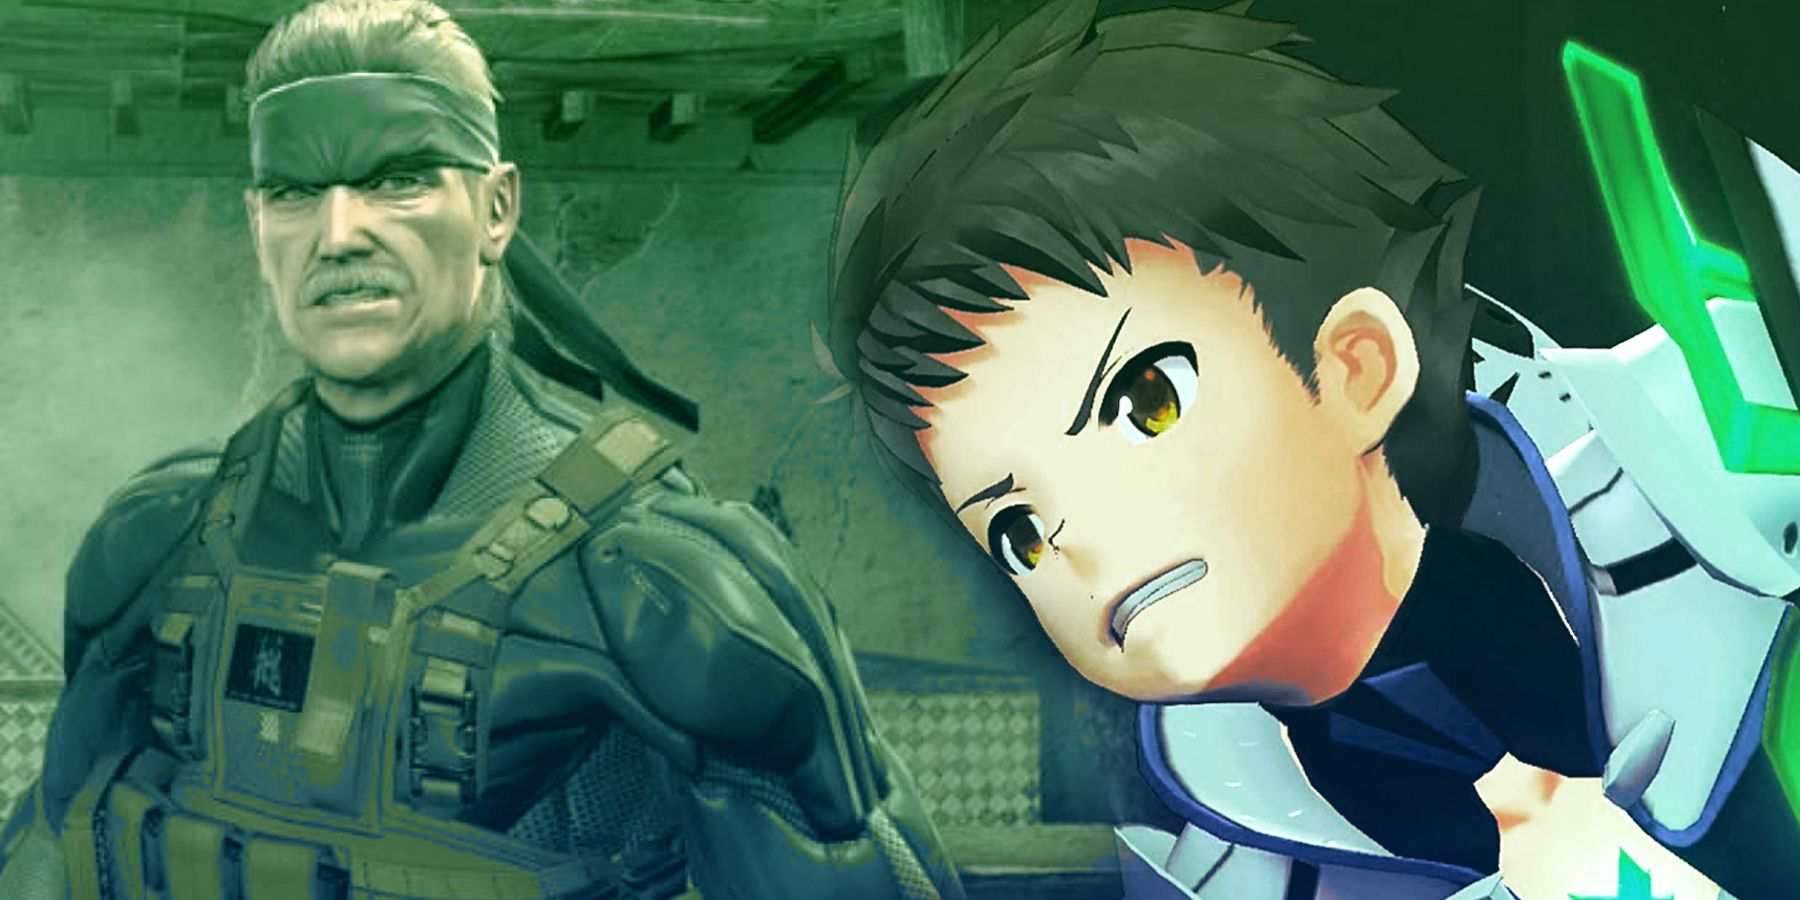 A split image of Snake from Metal Gear Solid and a character from Legend of Heroes